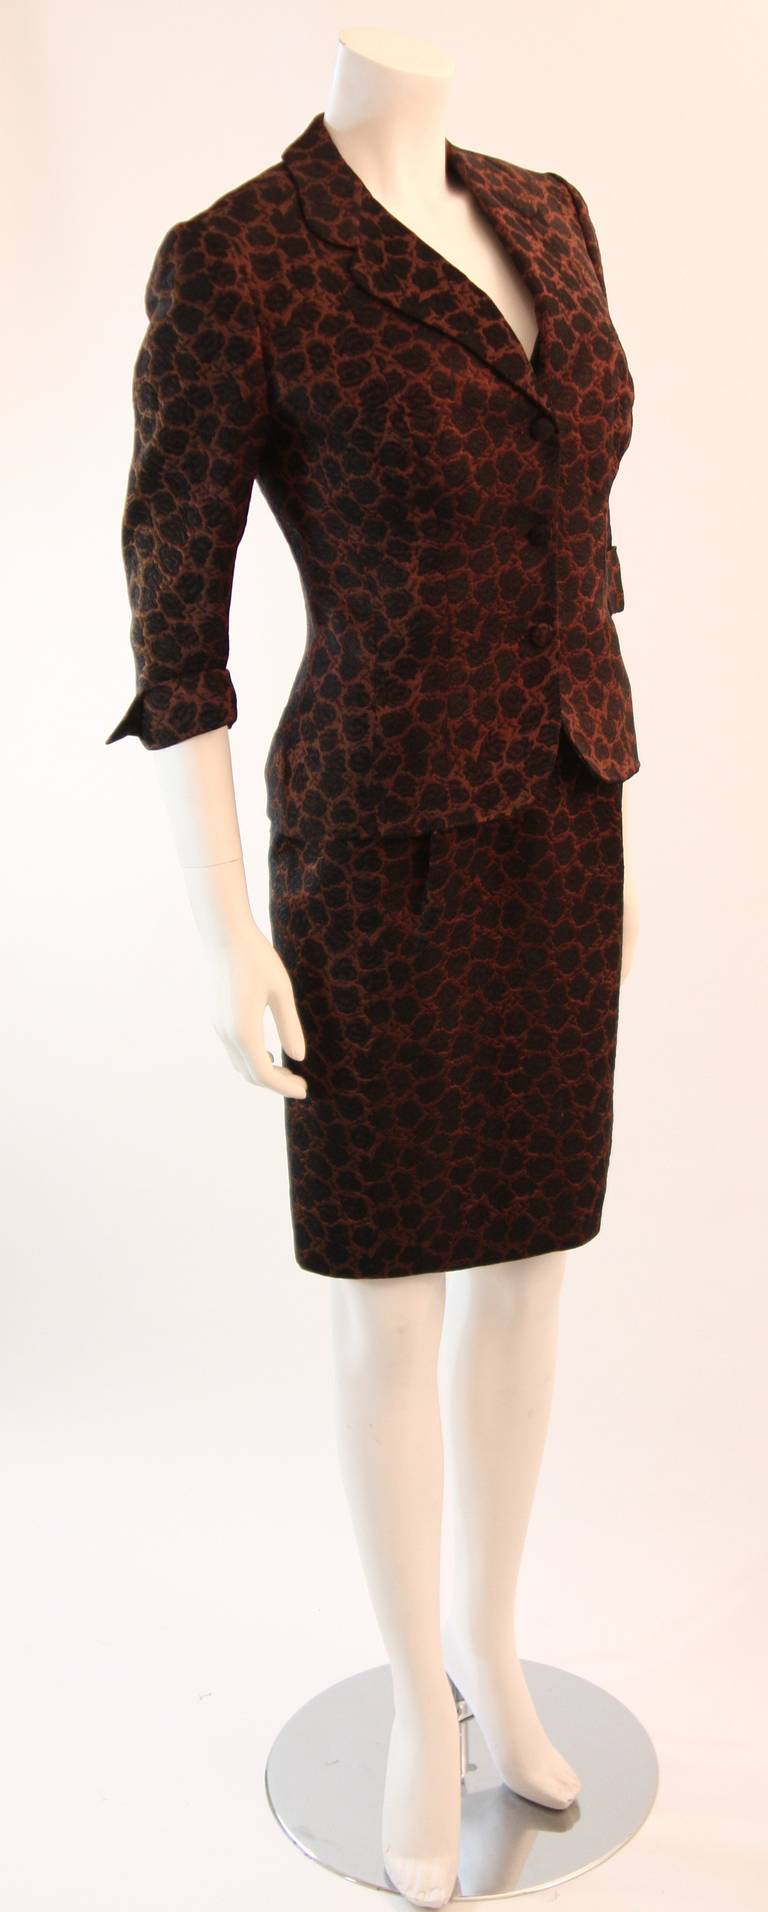 Stunning Mingolini Guggenheim Brown and Black Beaded Couture Dress Set For Sale 2